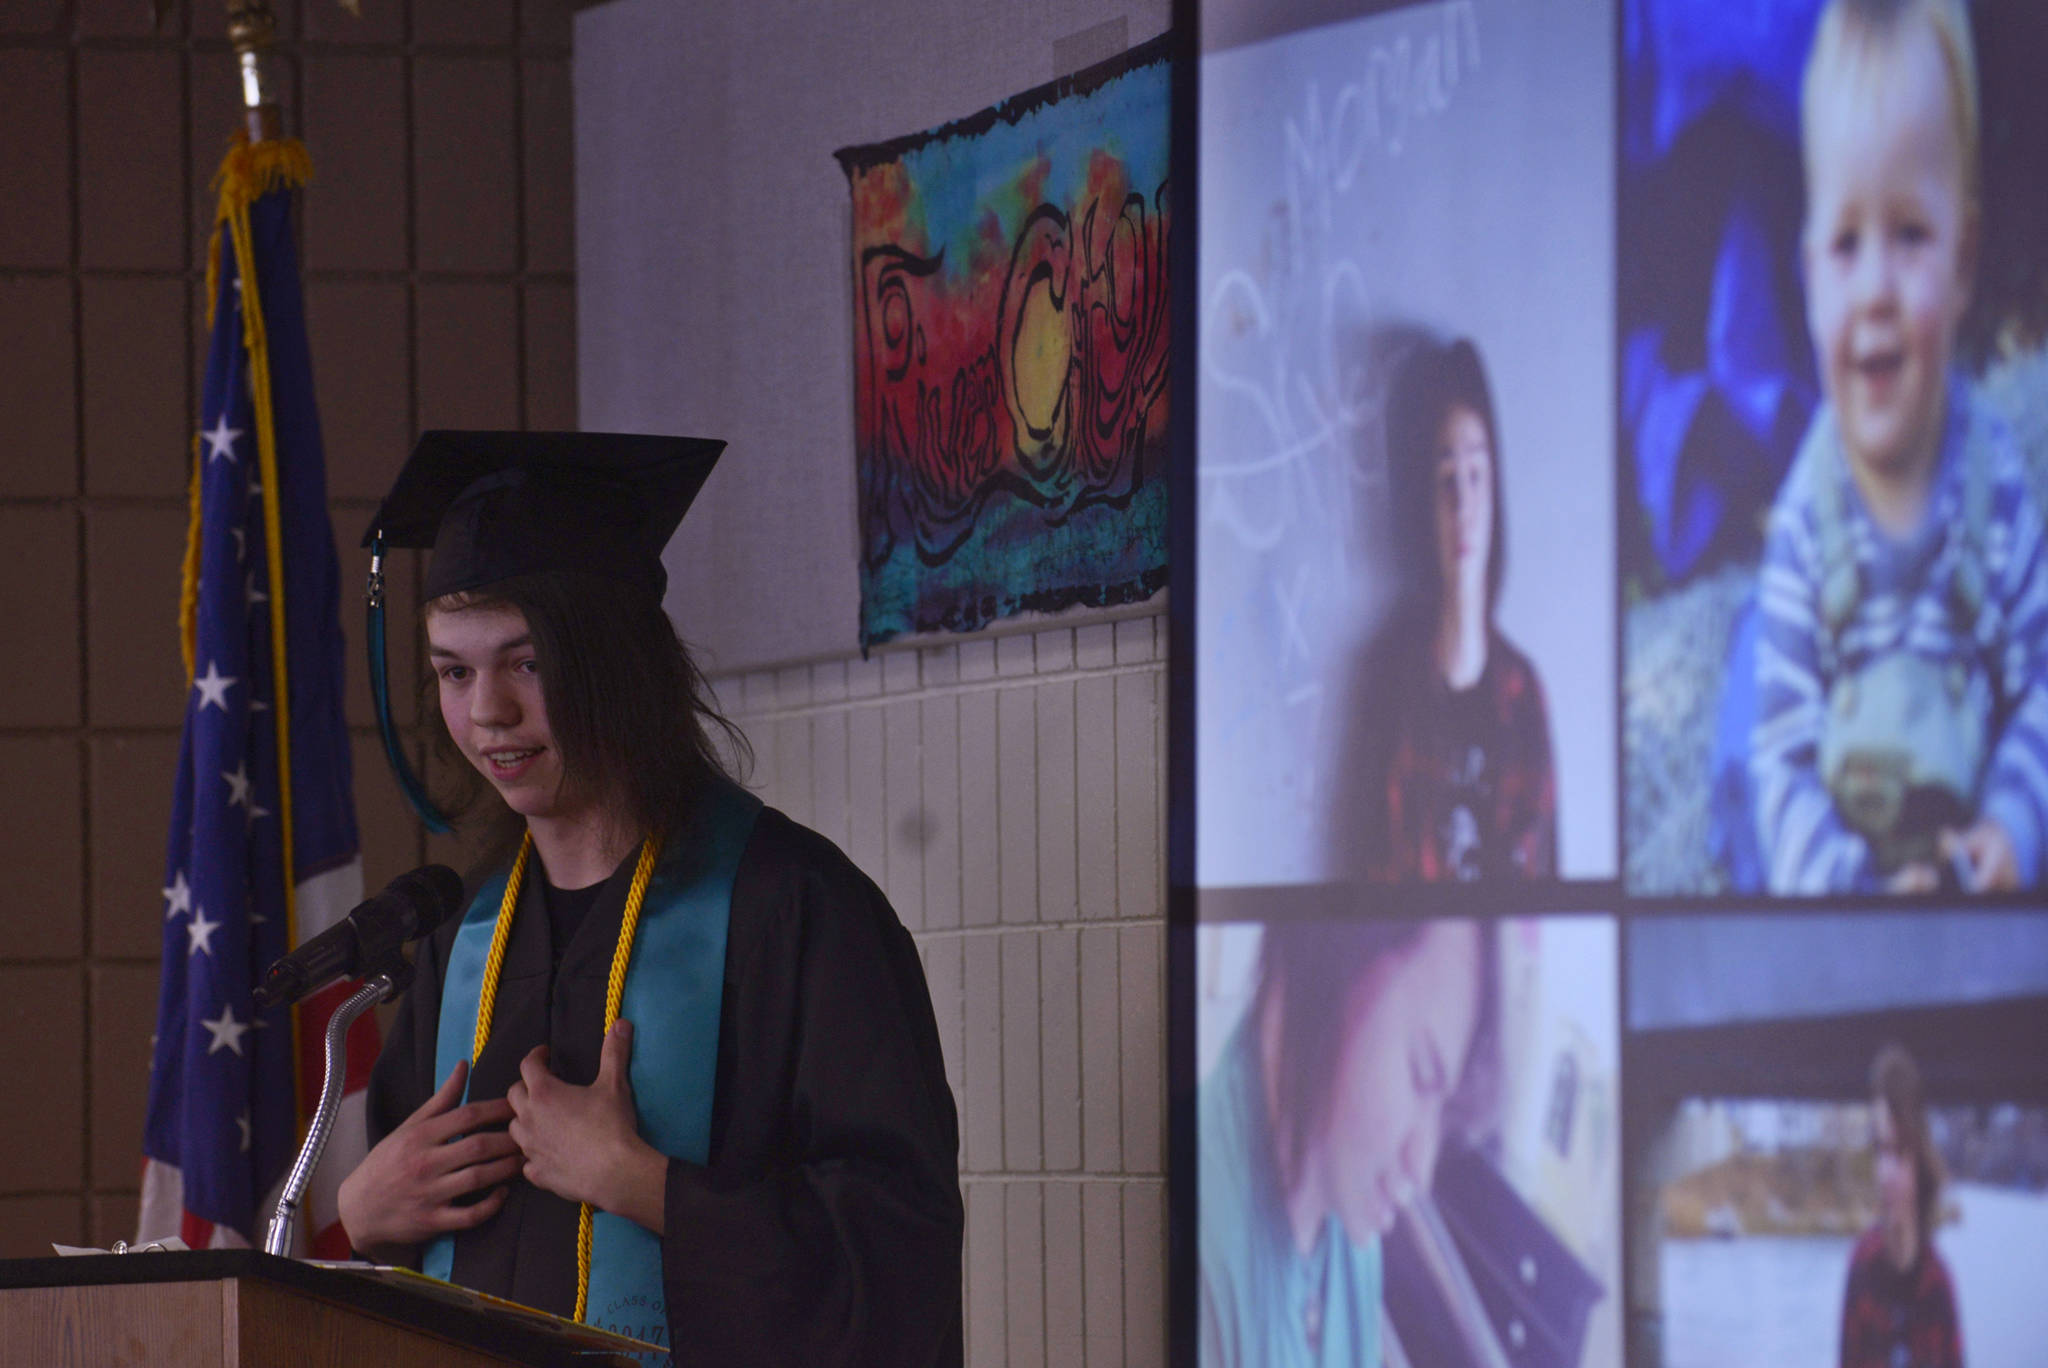 Flanked by his past portraits, River City Academy graduate Morgan Shepherd speaks to his eleven peers in River City’s class of 2017 during the school’s graduation ceremony on Wednesday, May 24, 2017 at the Soldotna Regional Sports Complex in Soldotna, Alaska. All the graduates gave speeches at the ceremony, introduced by principal Dawn Edwards-Smith, who compared each one to a literary or cinematic hero.